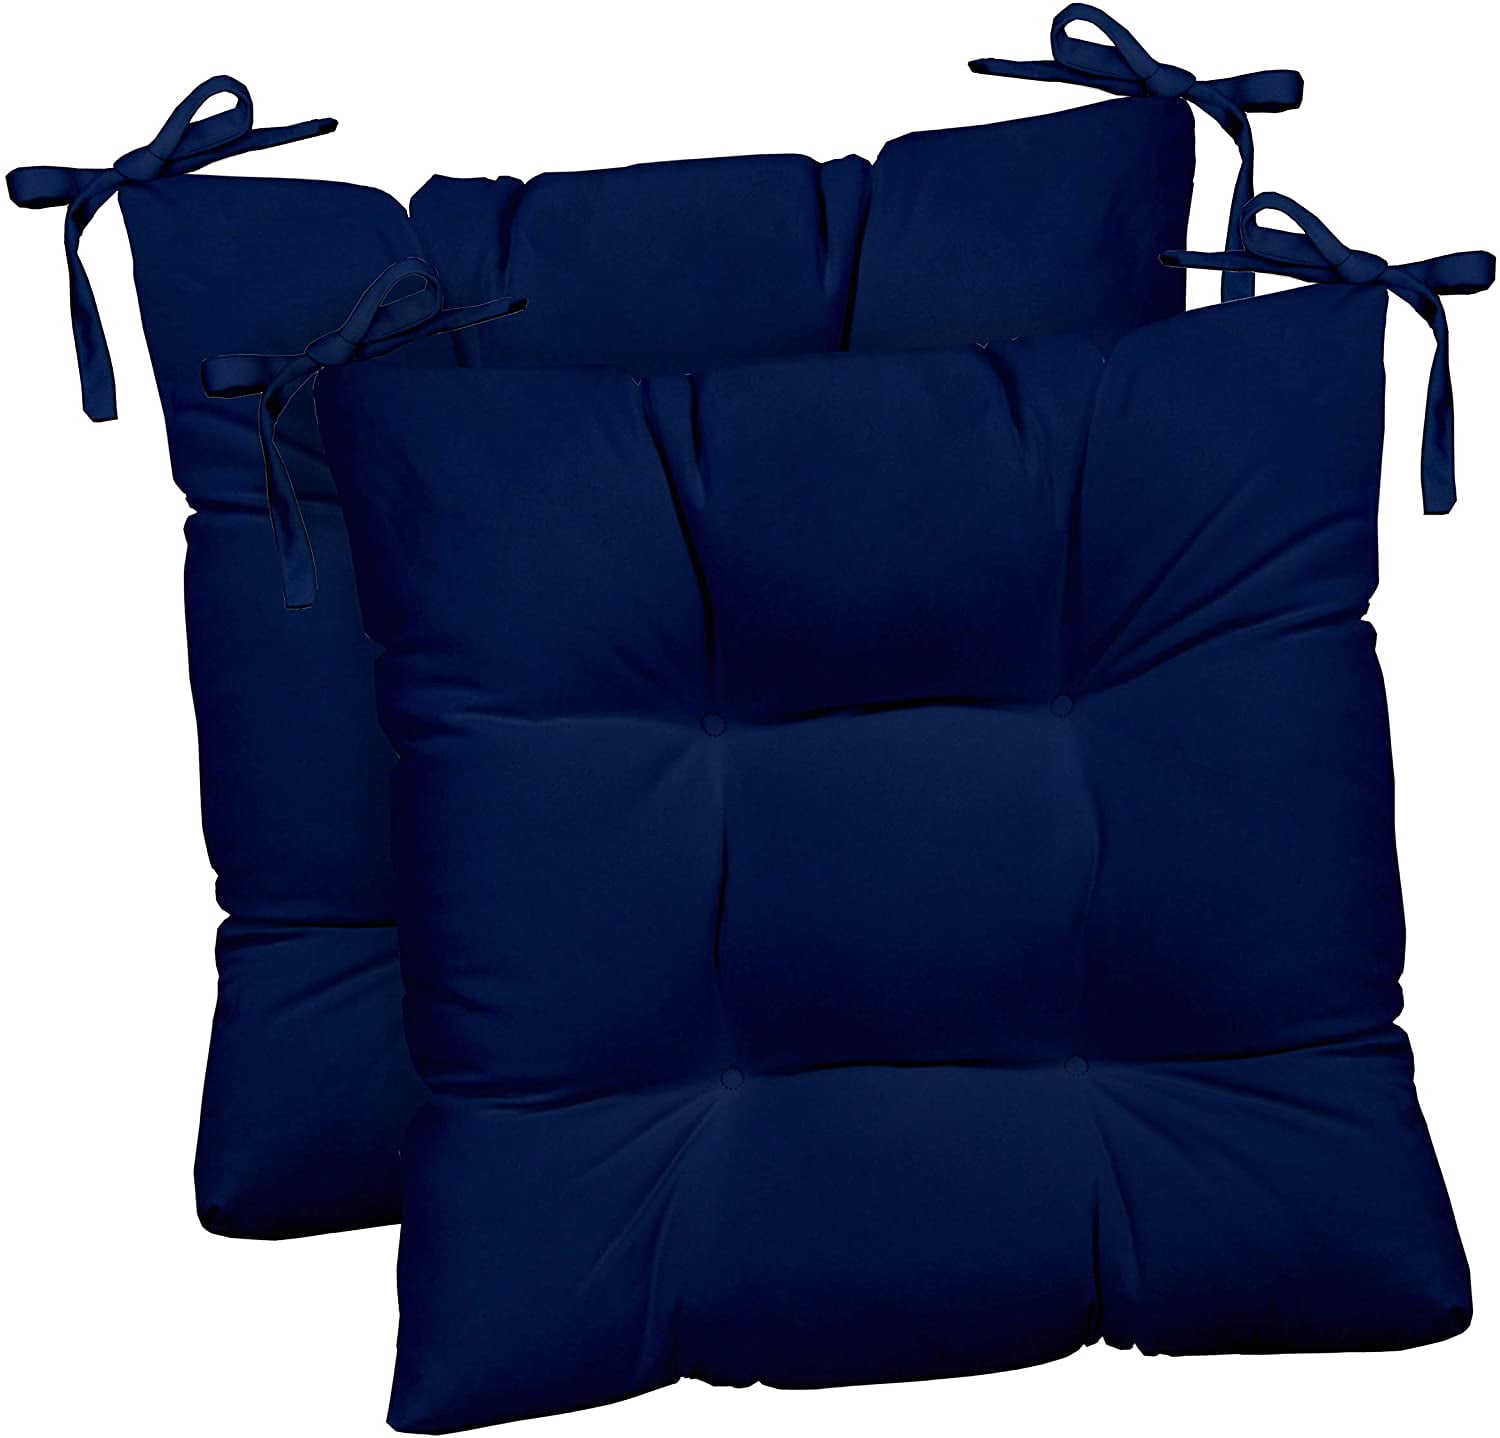 Tufted Dining Chair Seat Cushions 16, Royal Blue Chair Cushions Outdoor